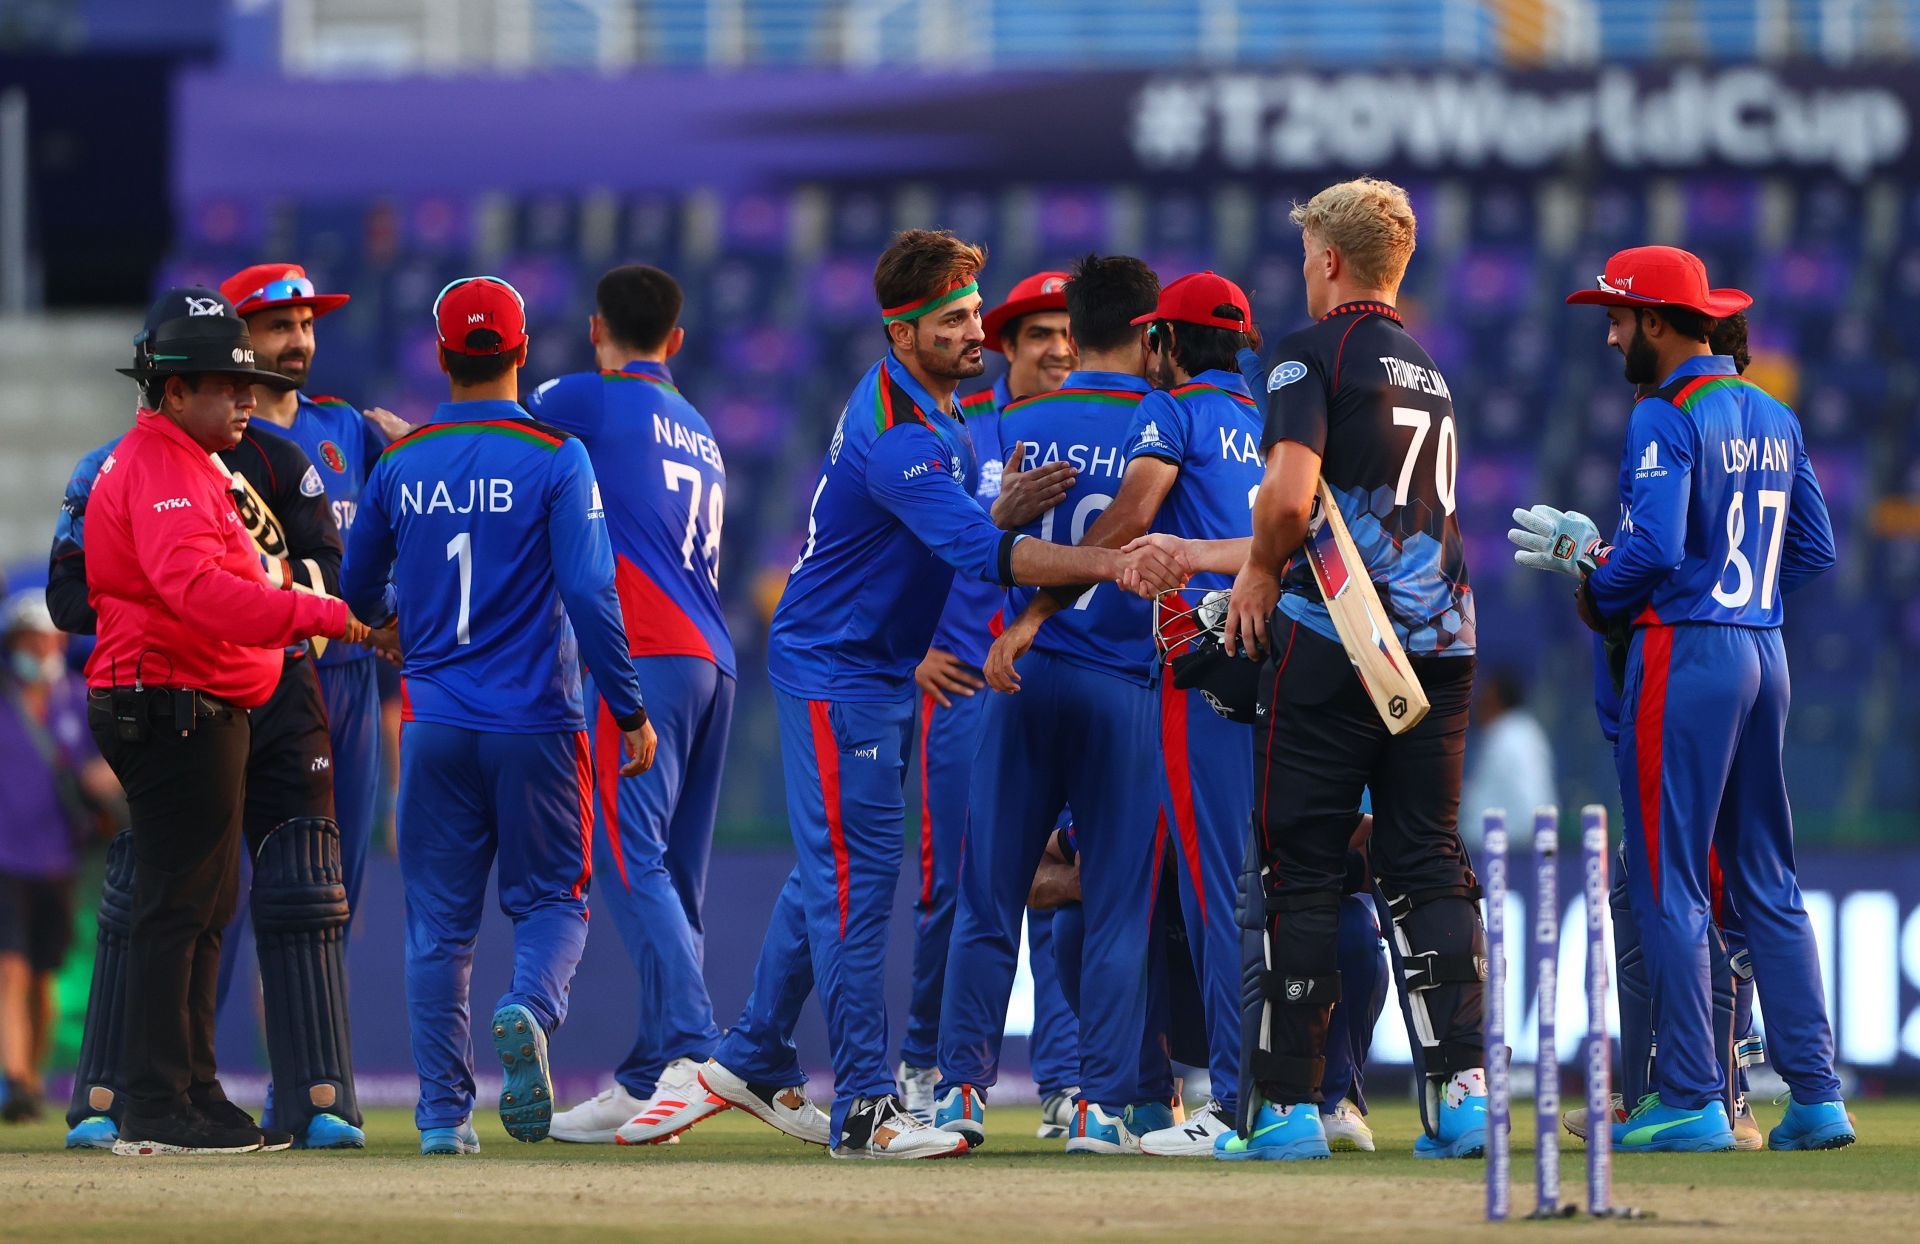 Afghanistan enter the contest on the back of a dominant win over Namibia